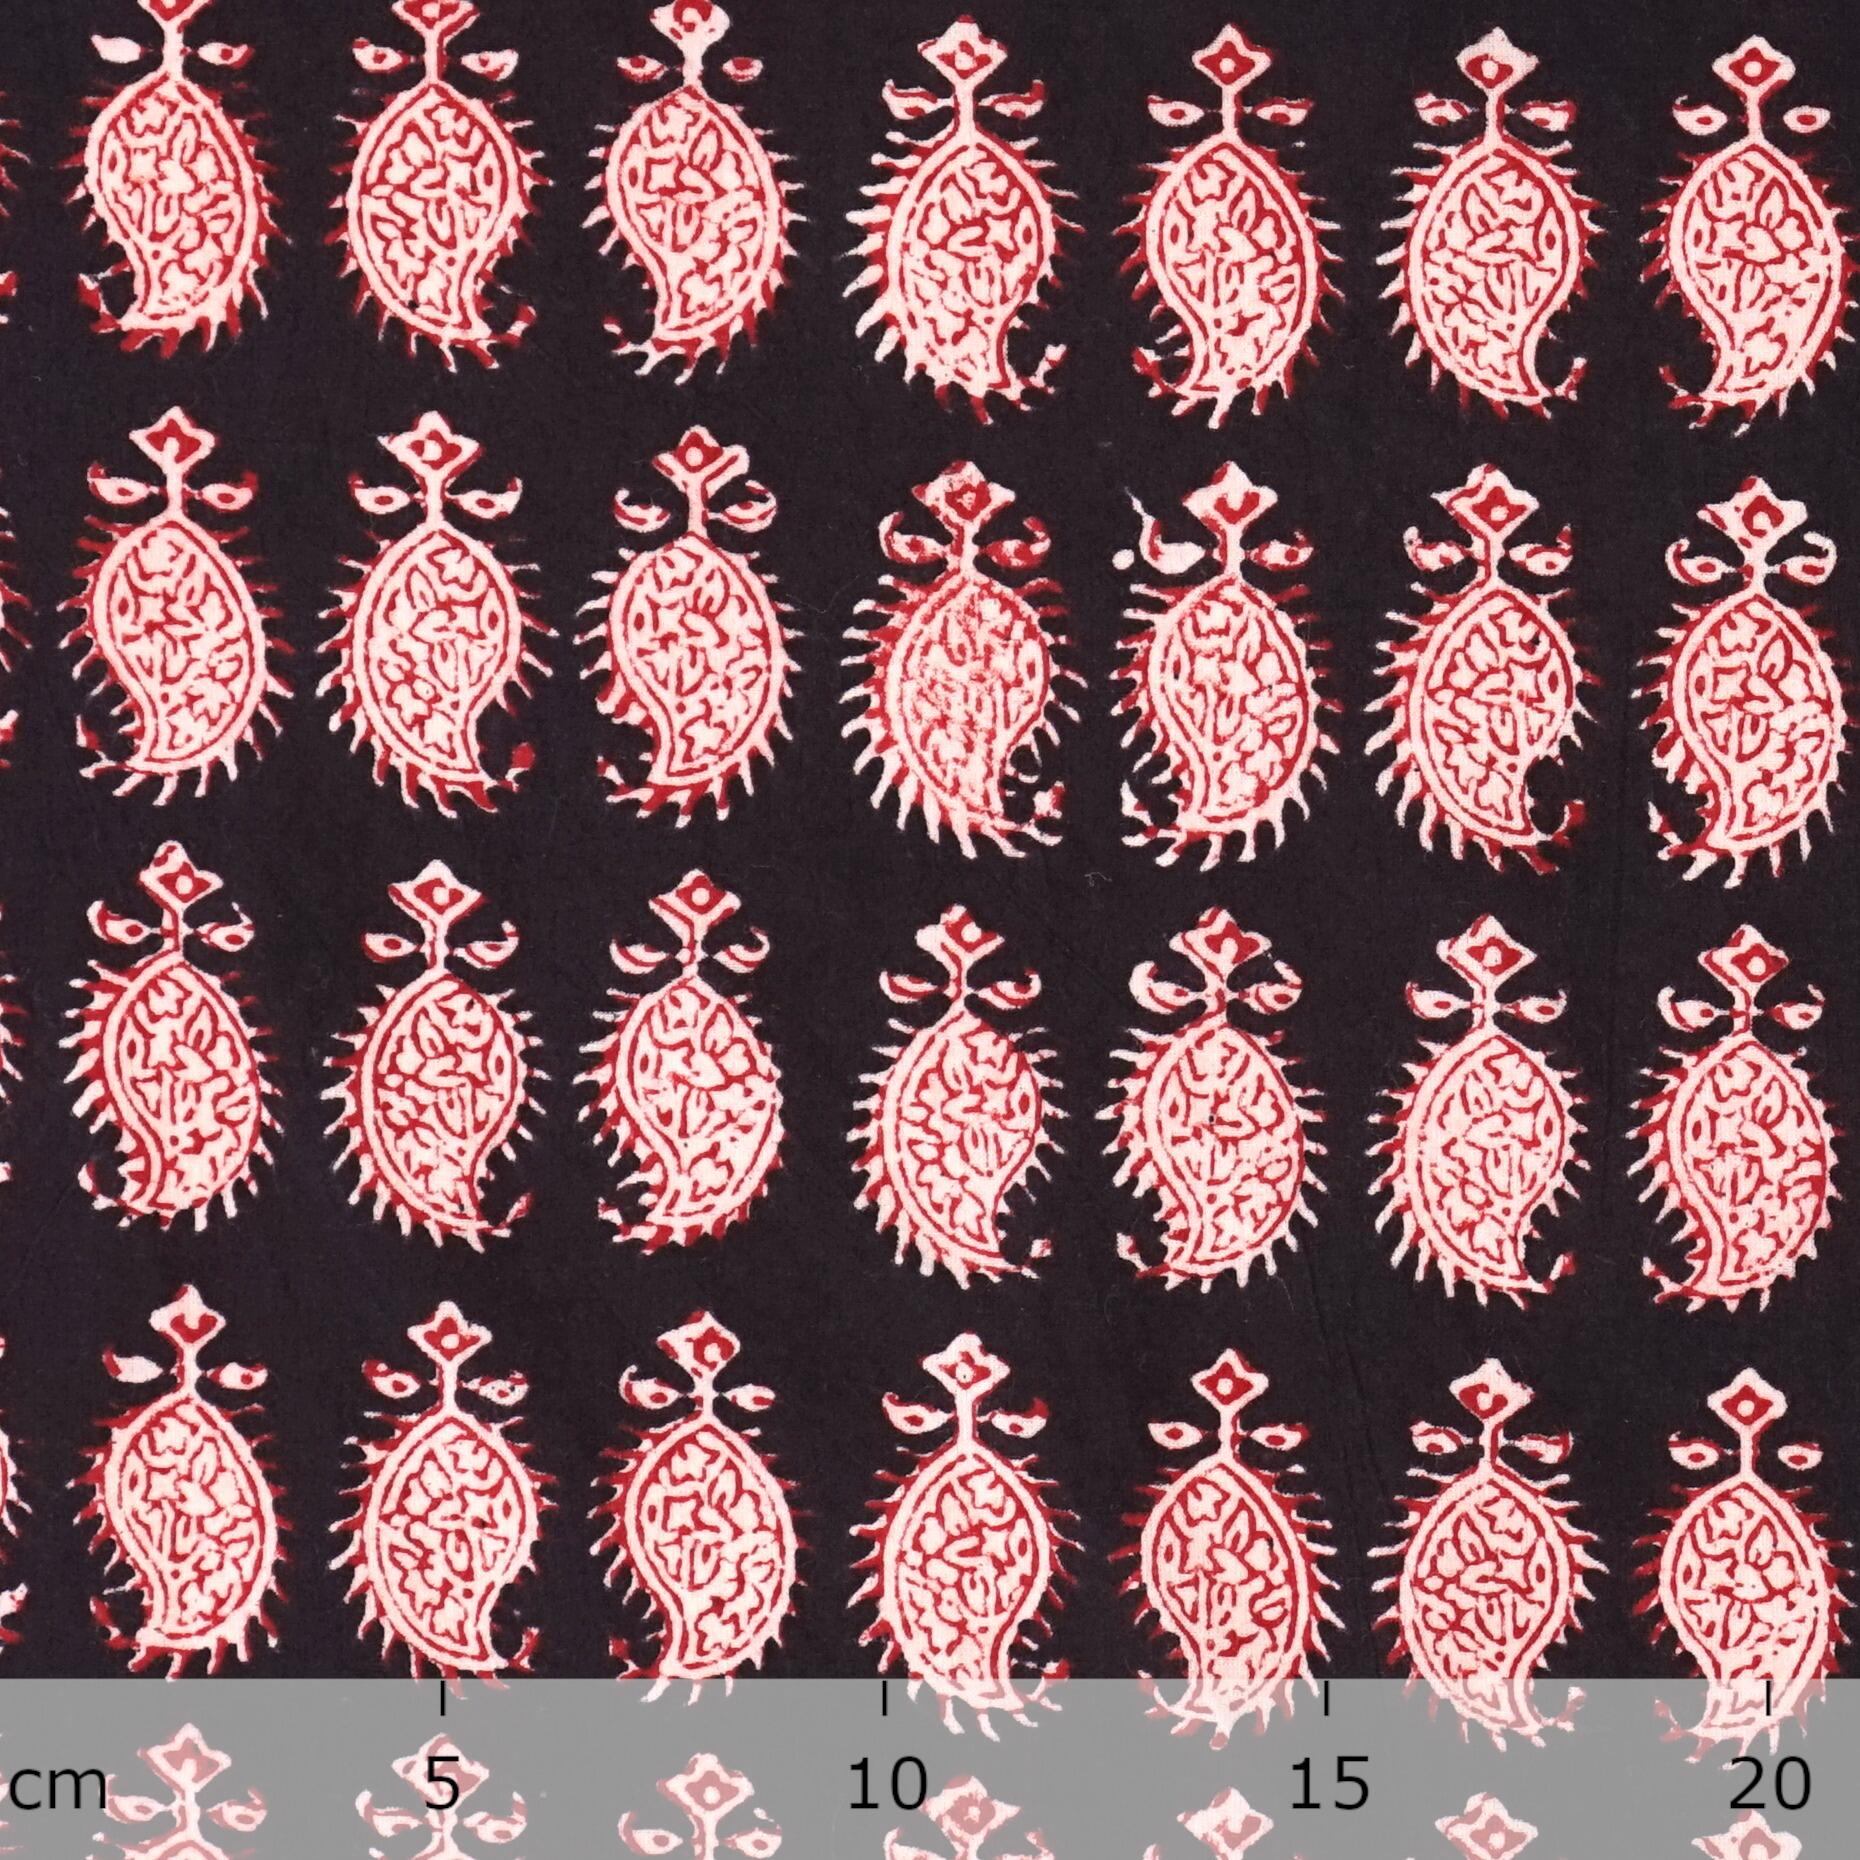 100% Block -Printed Cotton Fabric From India - Cactus Design - Iron Rust Black & Alizarin Red Dyes - Ruler